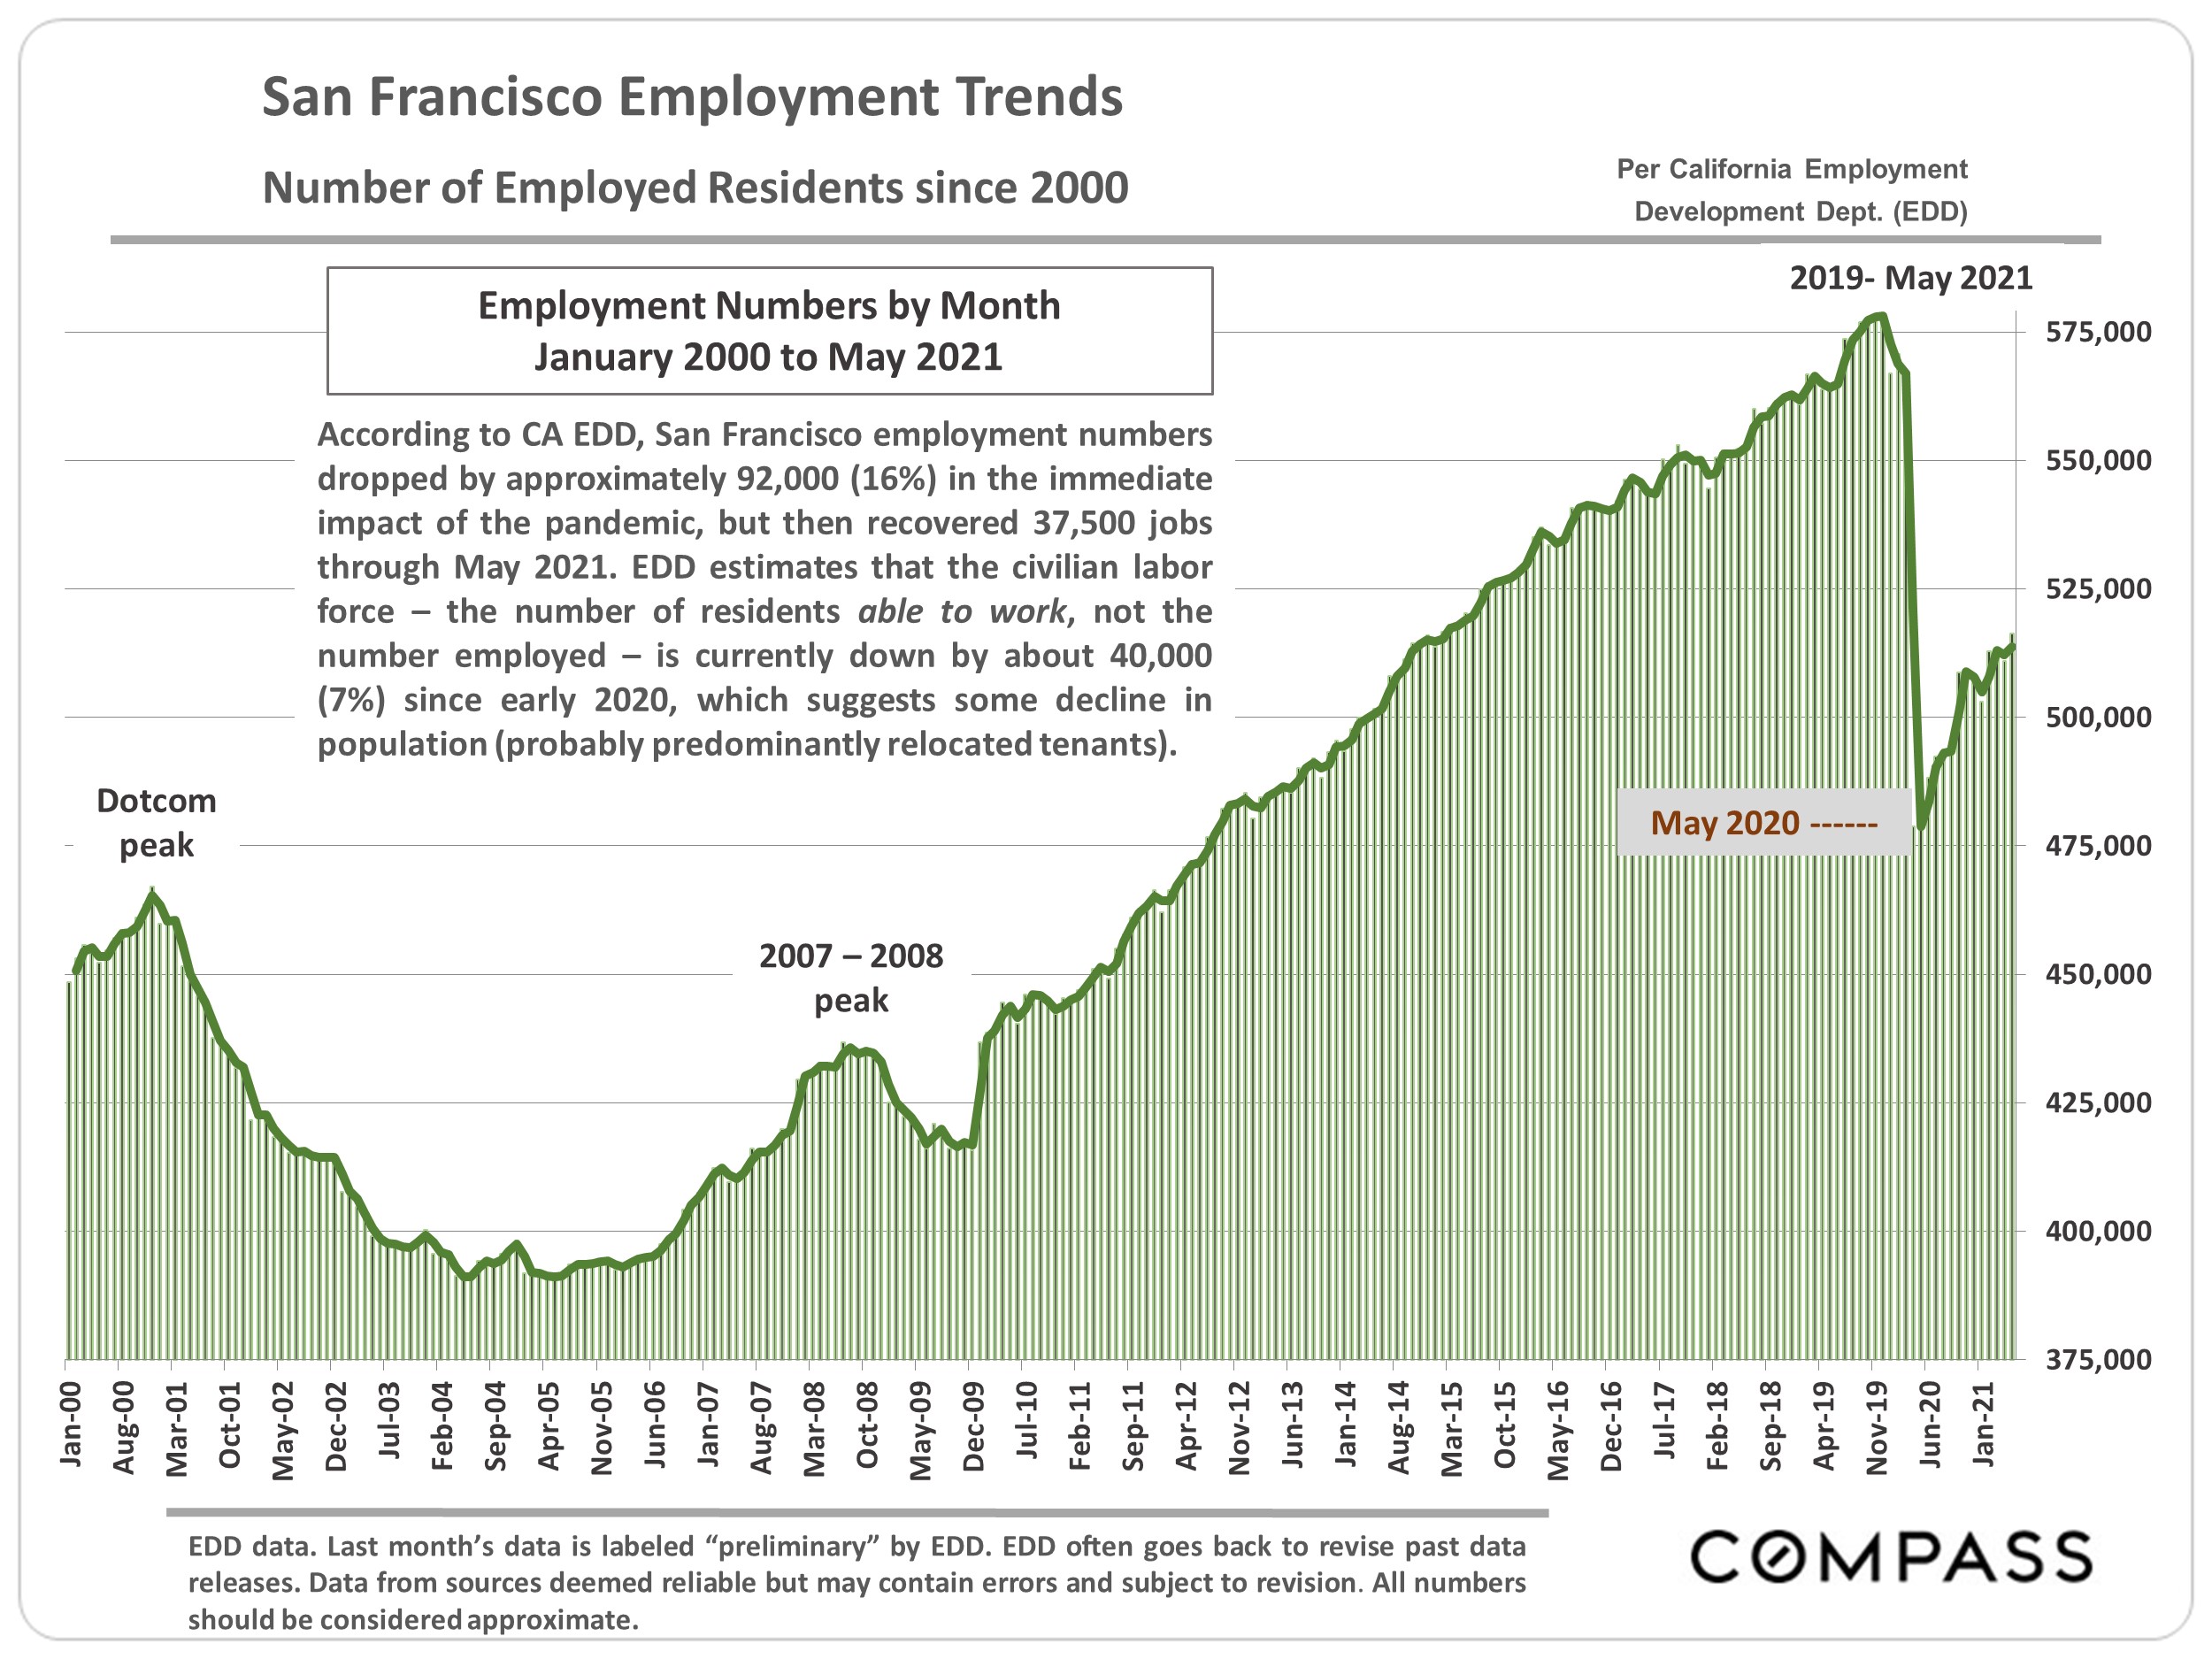 Graph showing San Francisco Employment Trends; Number of employed residents since Jan 2000 to May 2021